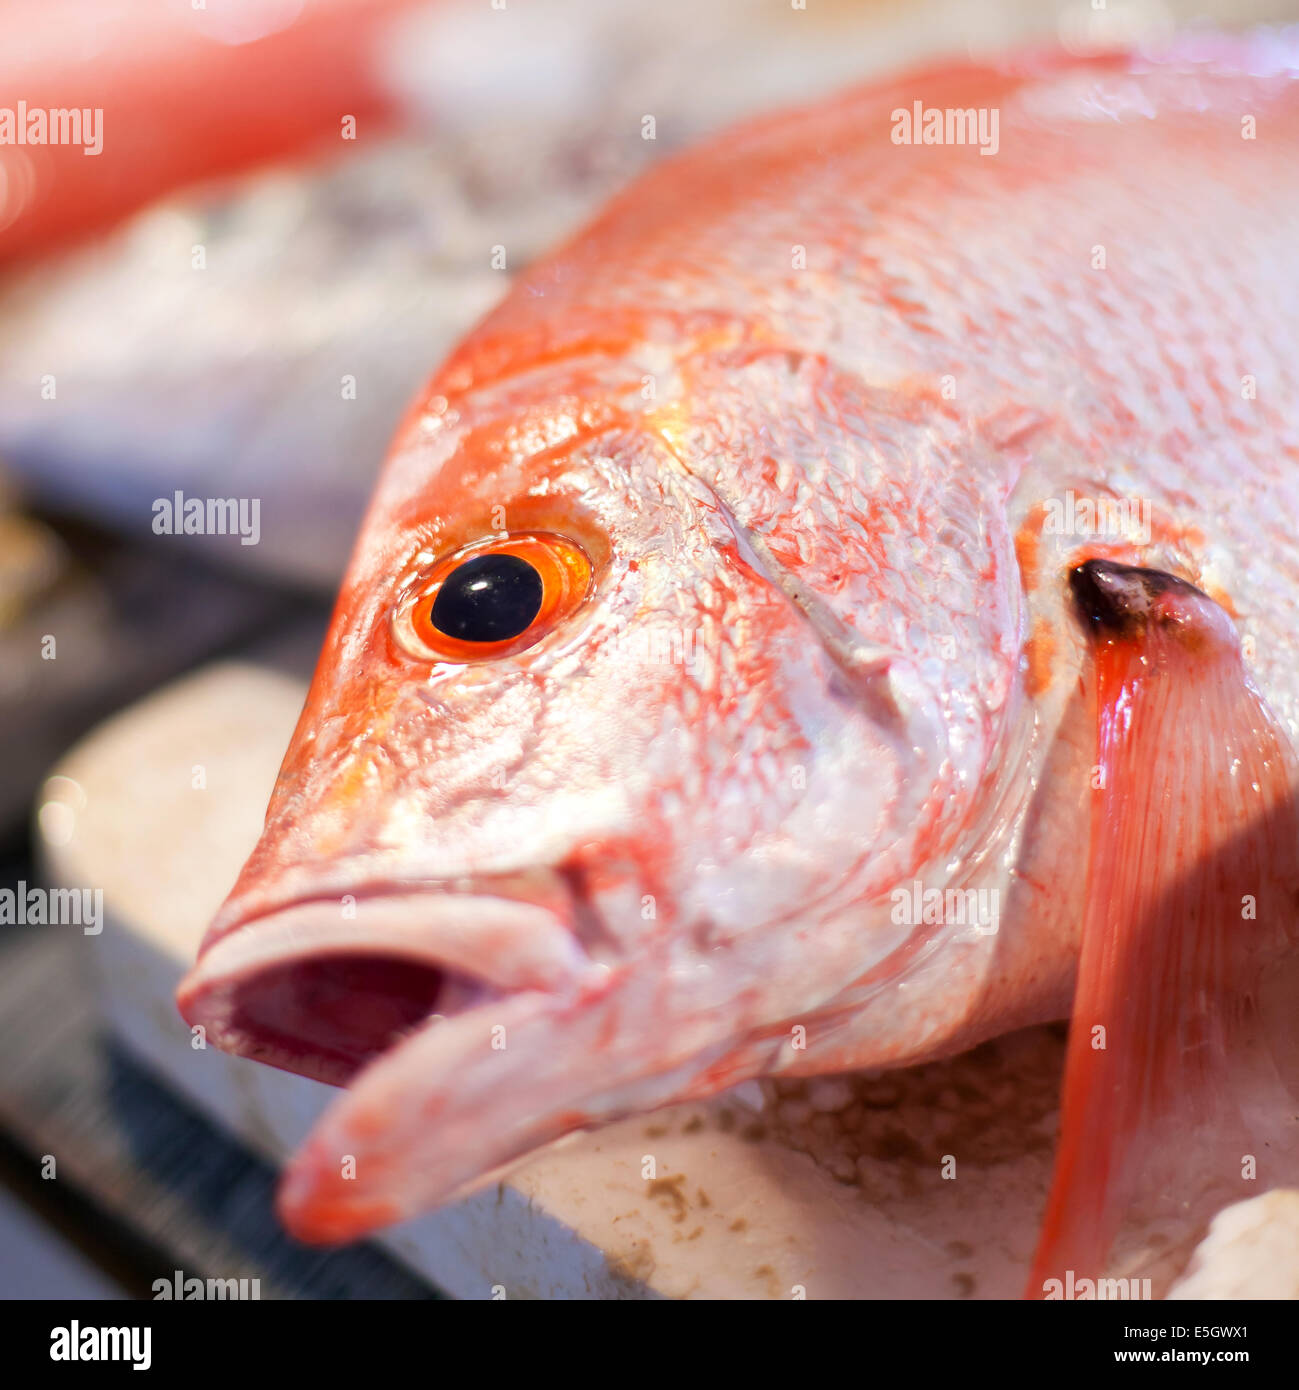 Red snapper in chinese